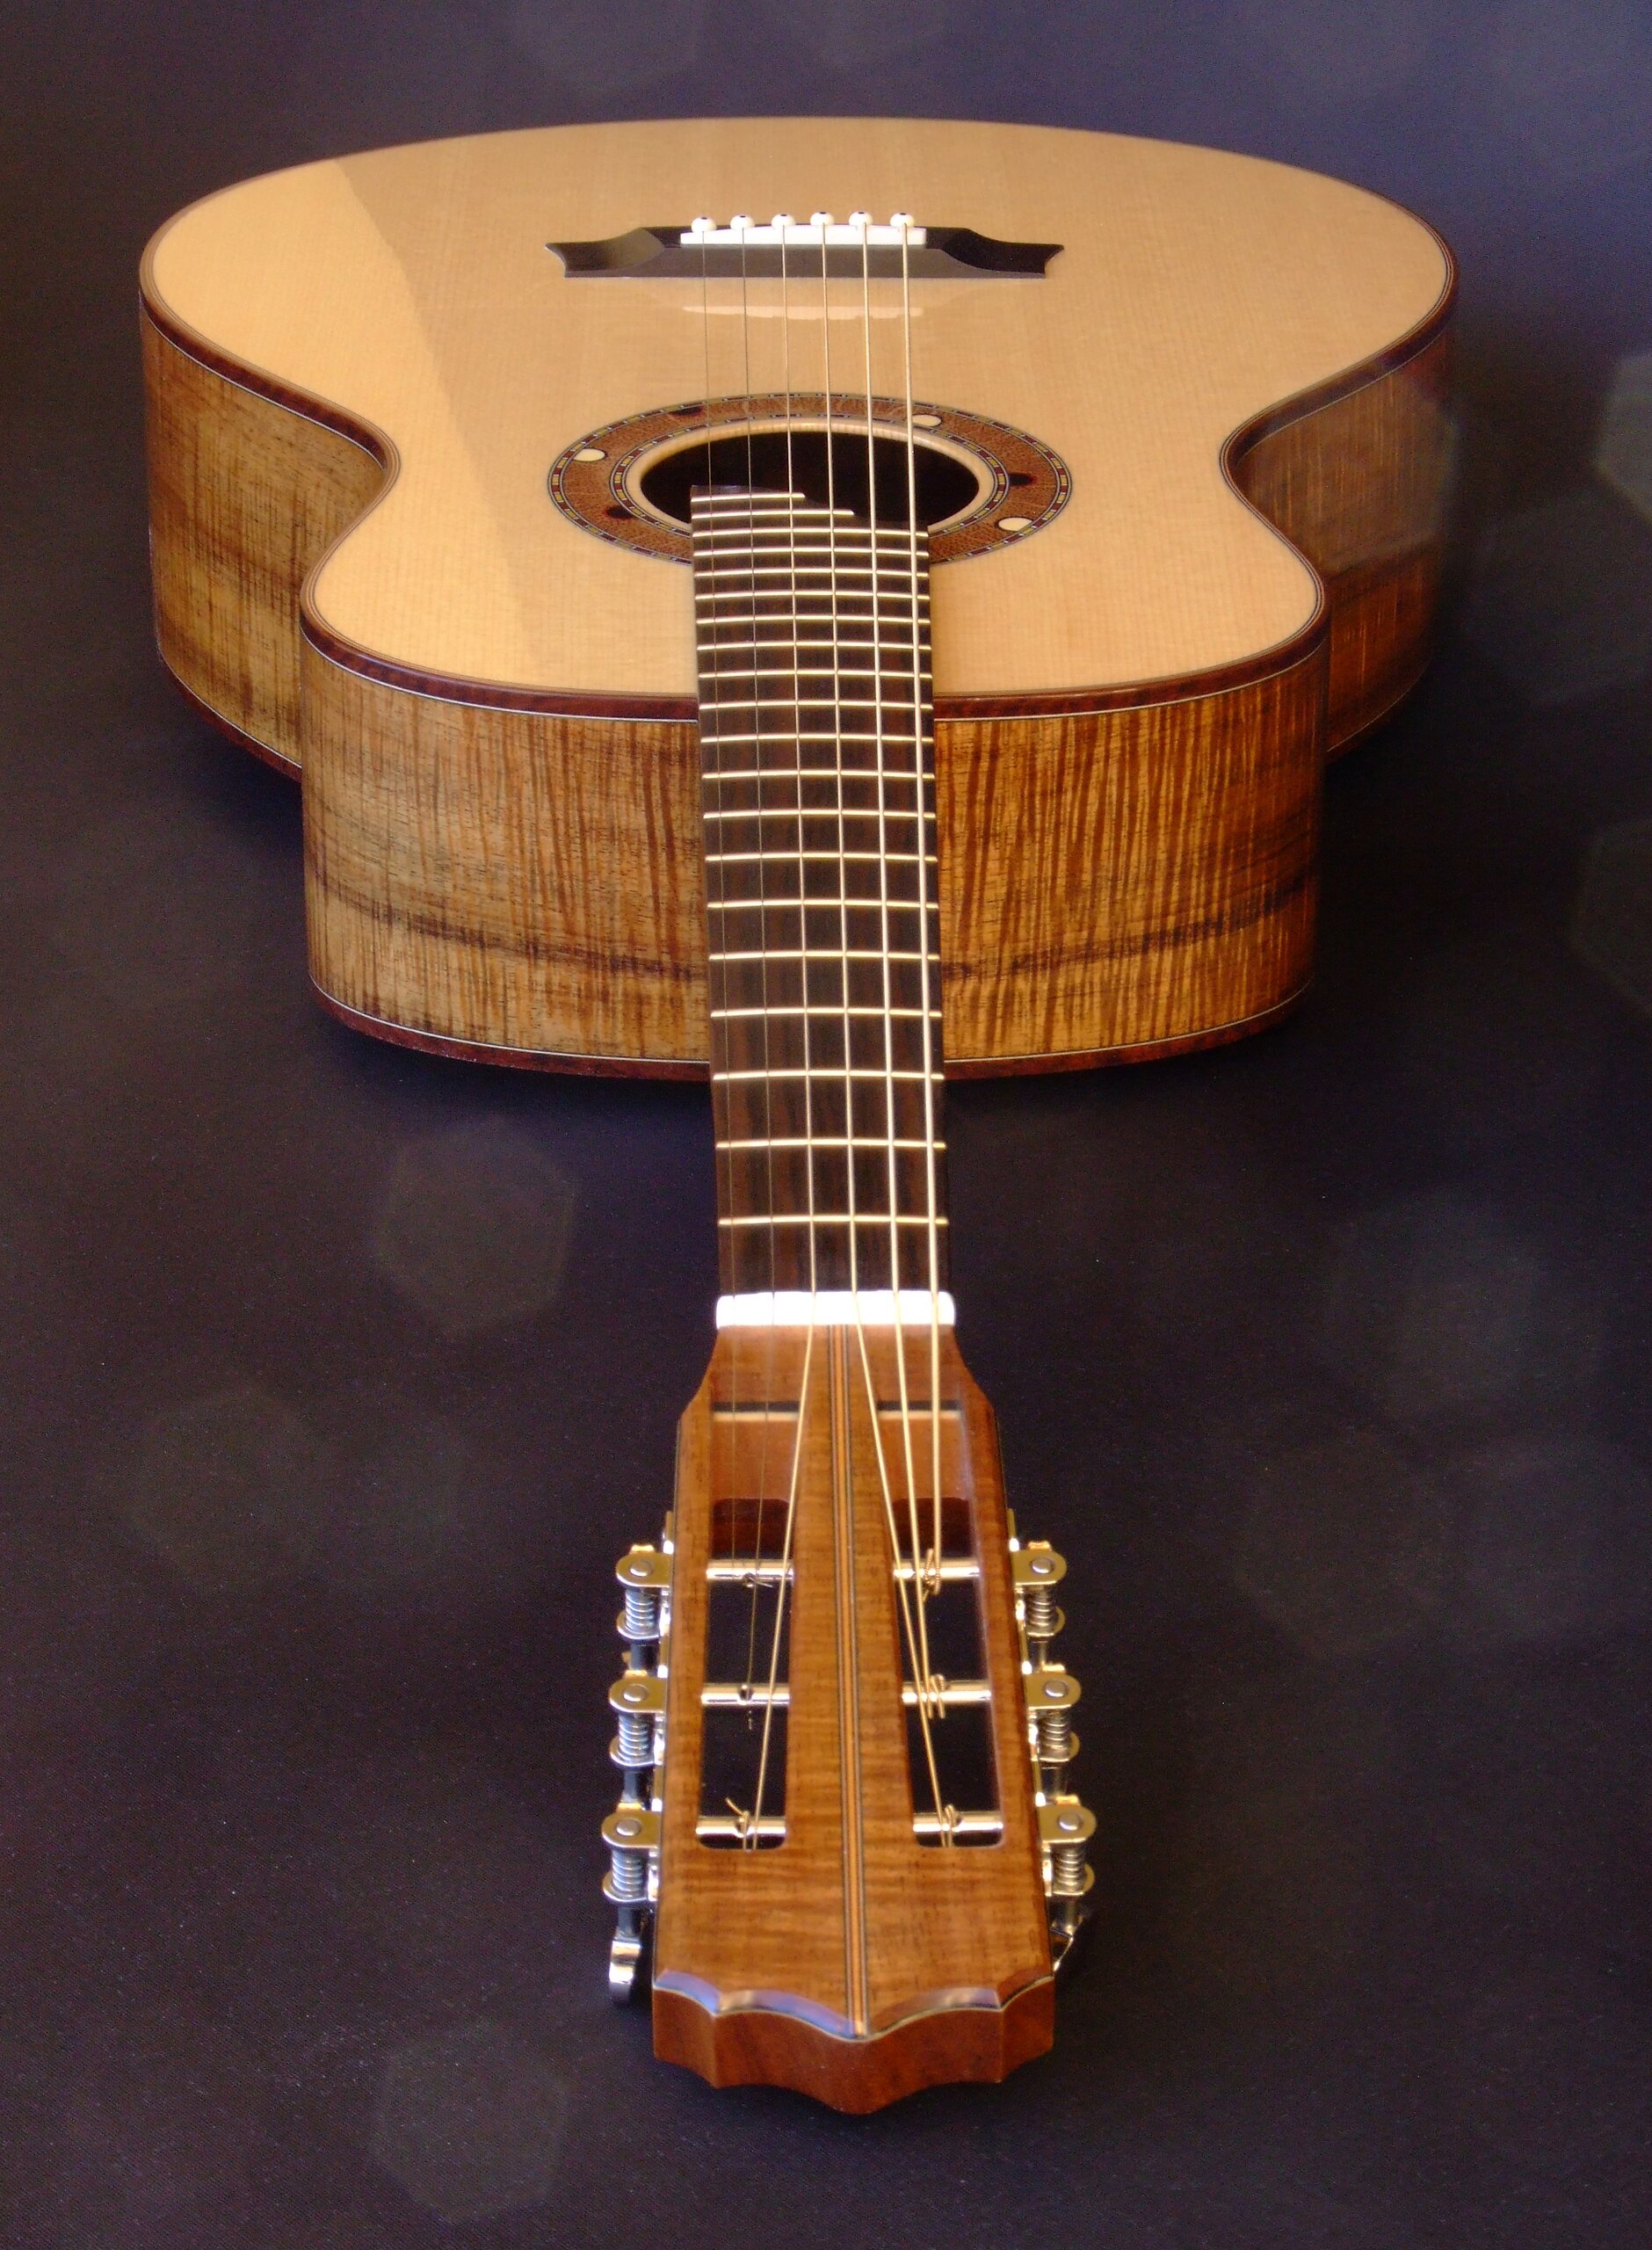 Looking down the neck of a blackwood classical guitar